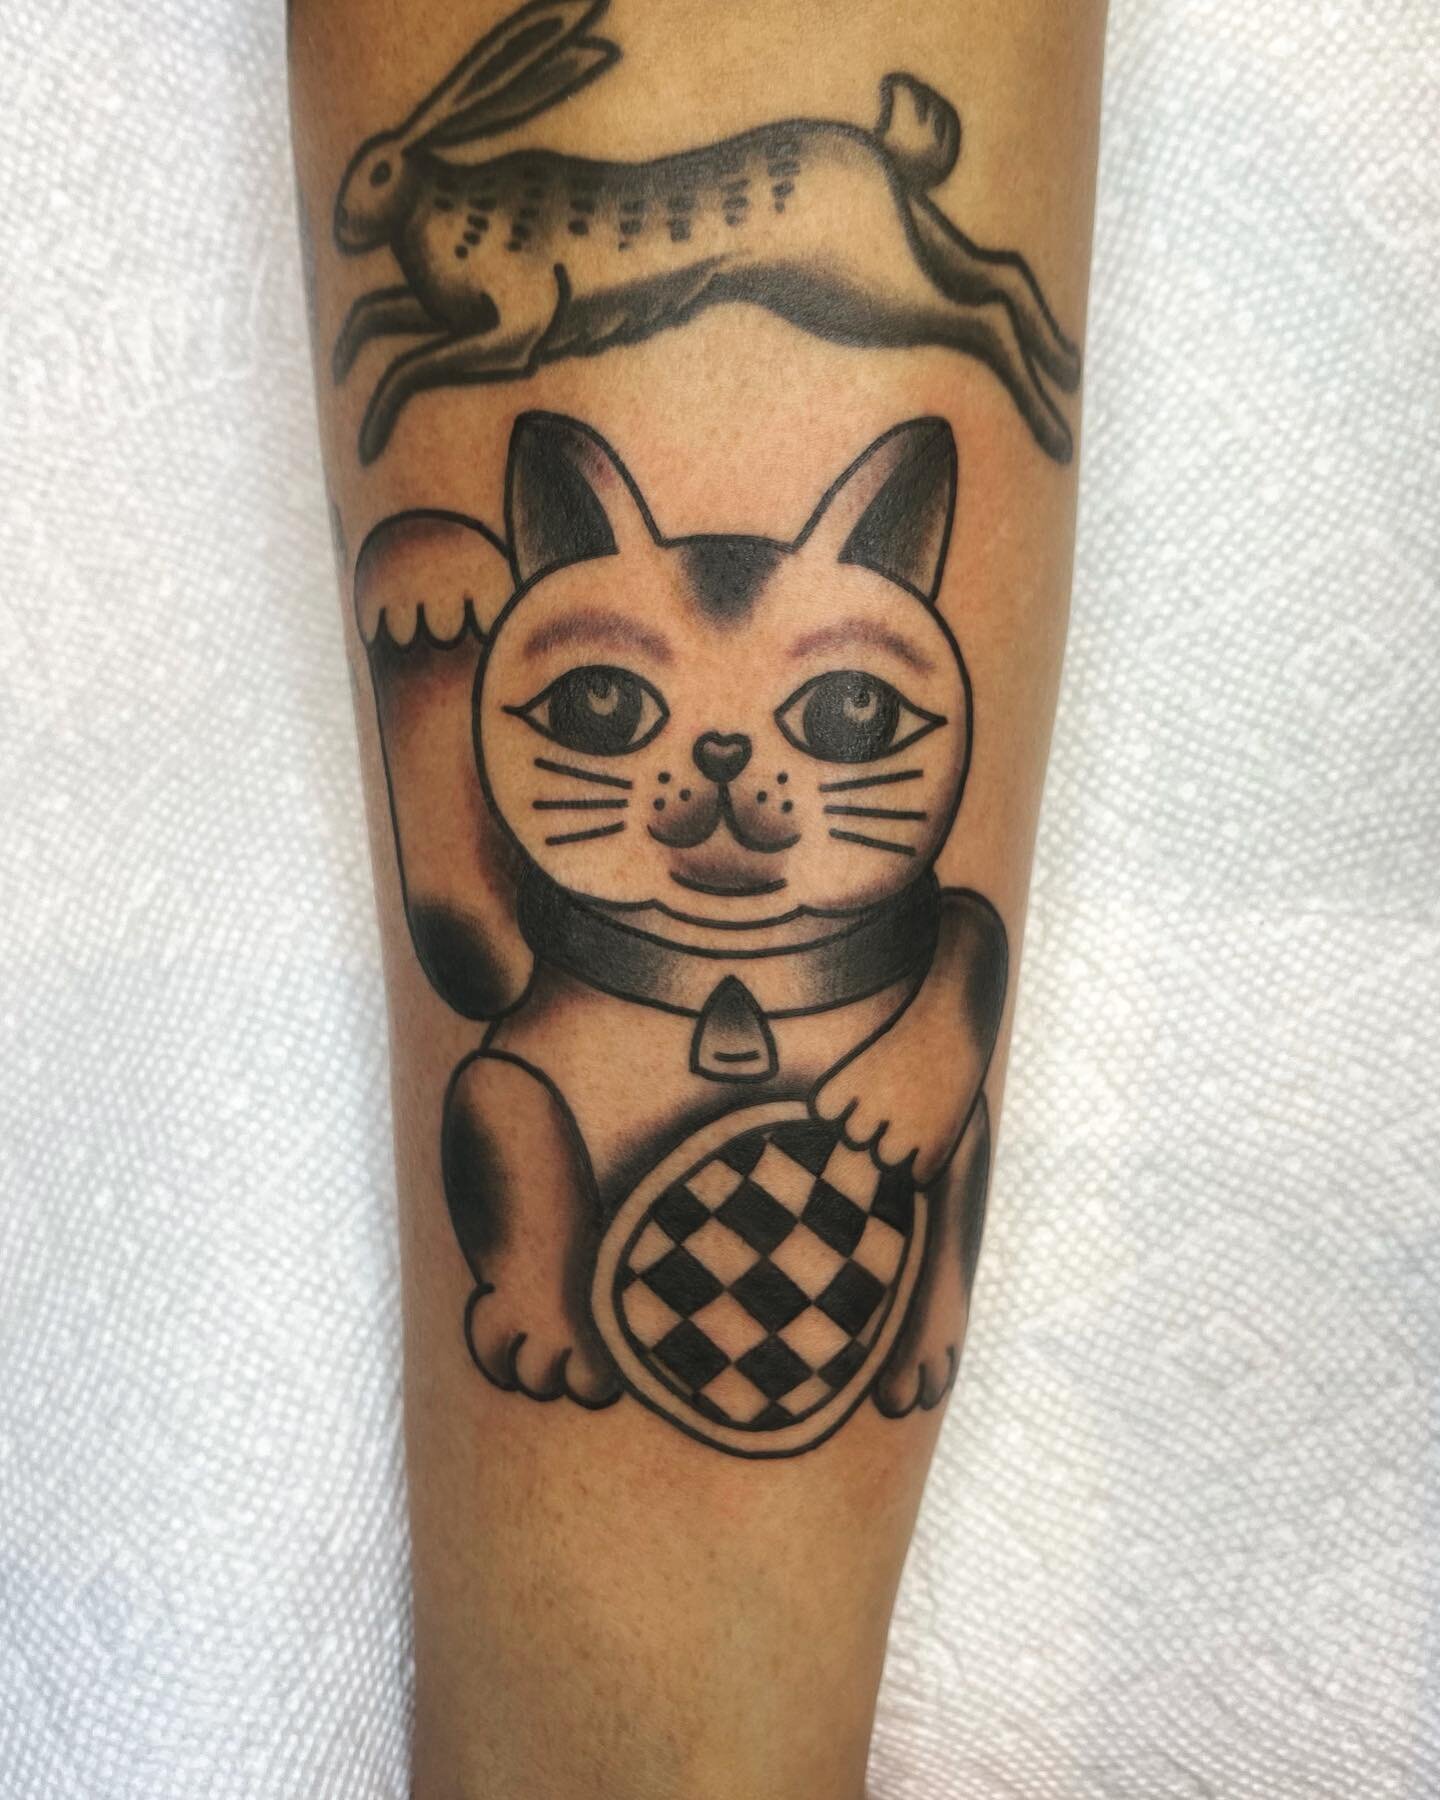 custom neko cat for jason, always good hangs! thanks for coming back (also sitting next to a healed hare)

done at @familytattoo